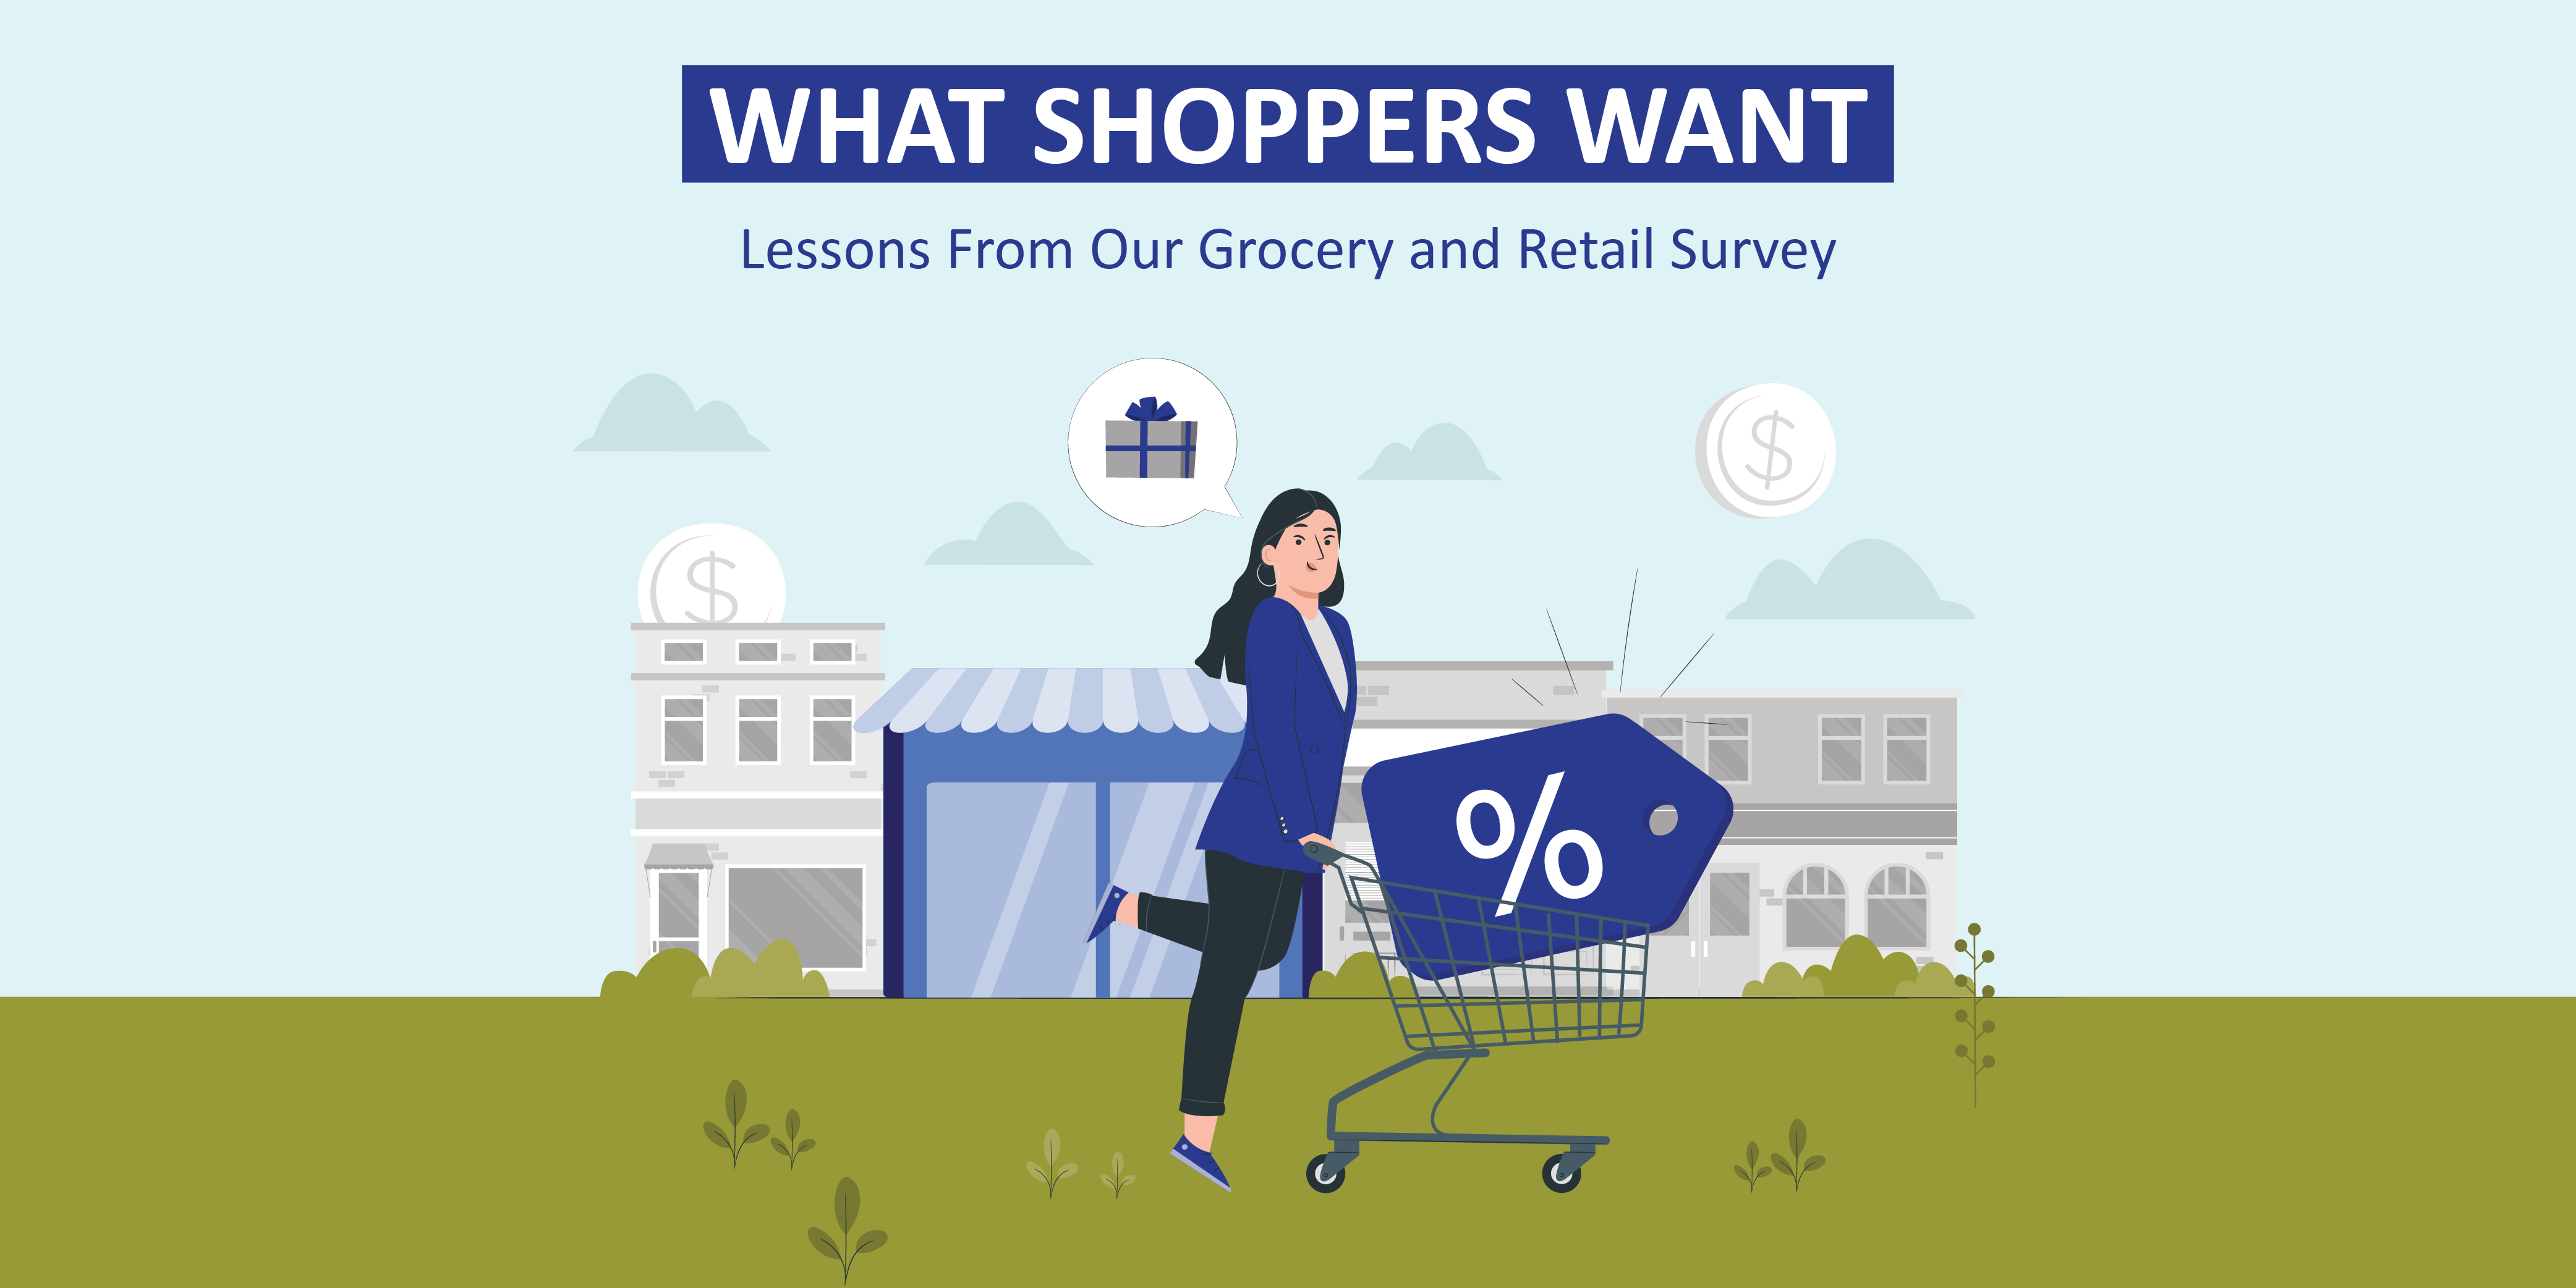 OneView went directly to over 600 shoppers to see what they prefer and expect in retail experiences